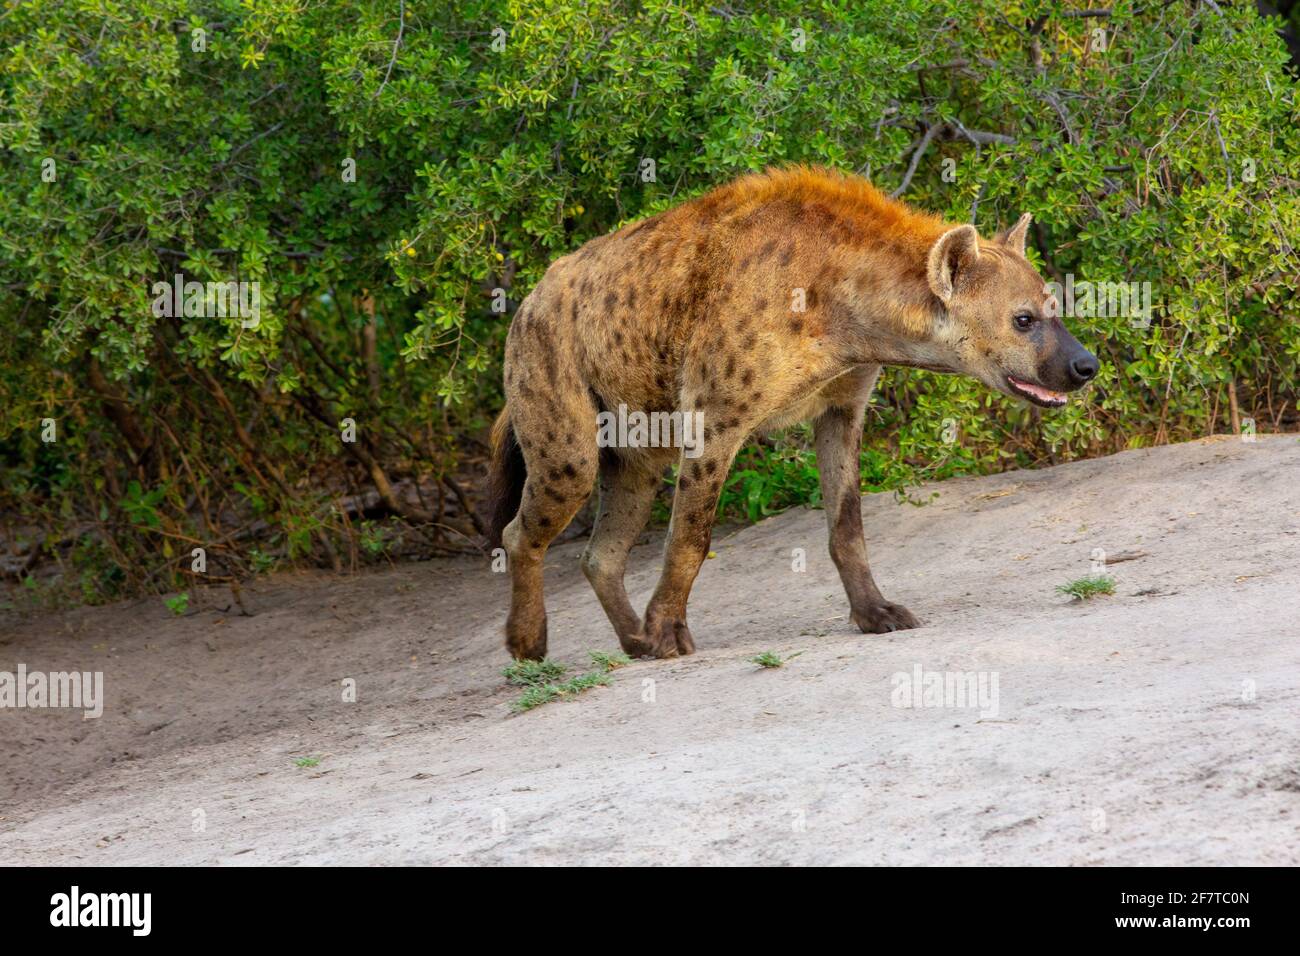 Spotted Hyaena (Crocuta crocuta). Adult animal emerging from a communal below ground den. Quadrupedal ambling pacing gait, left and right legs in turn Stock Photo